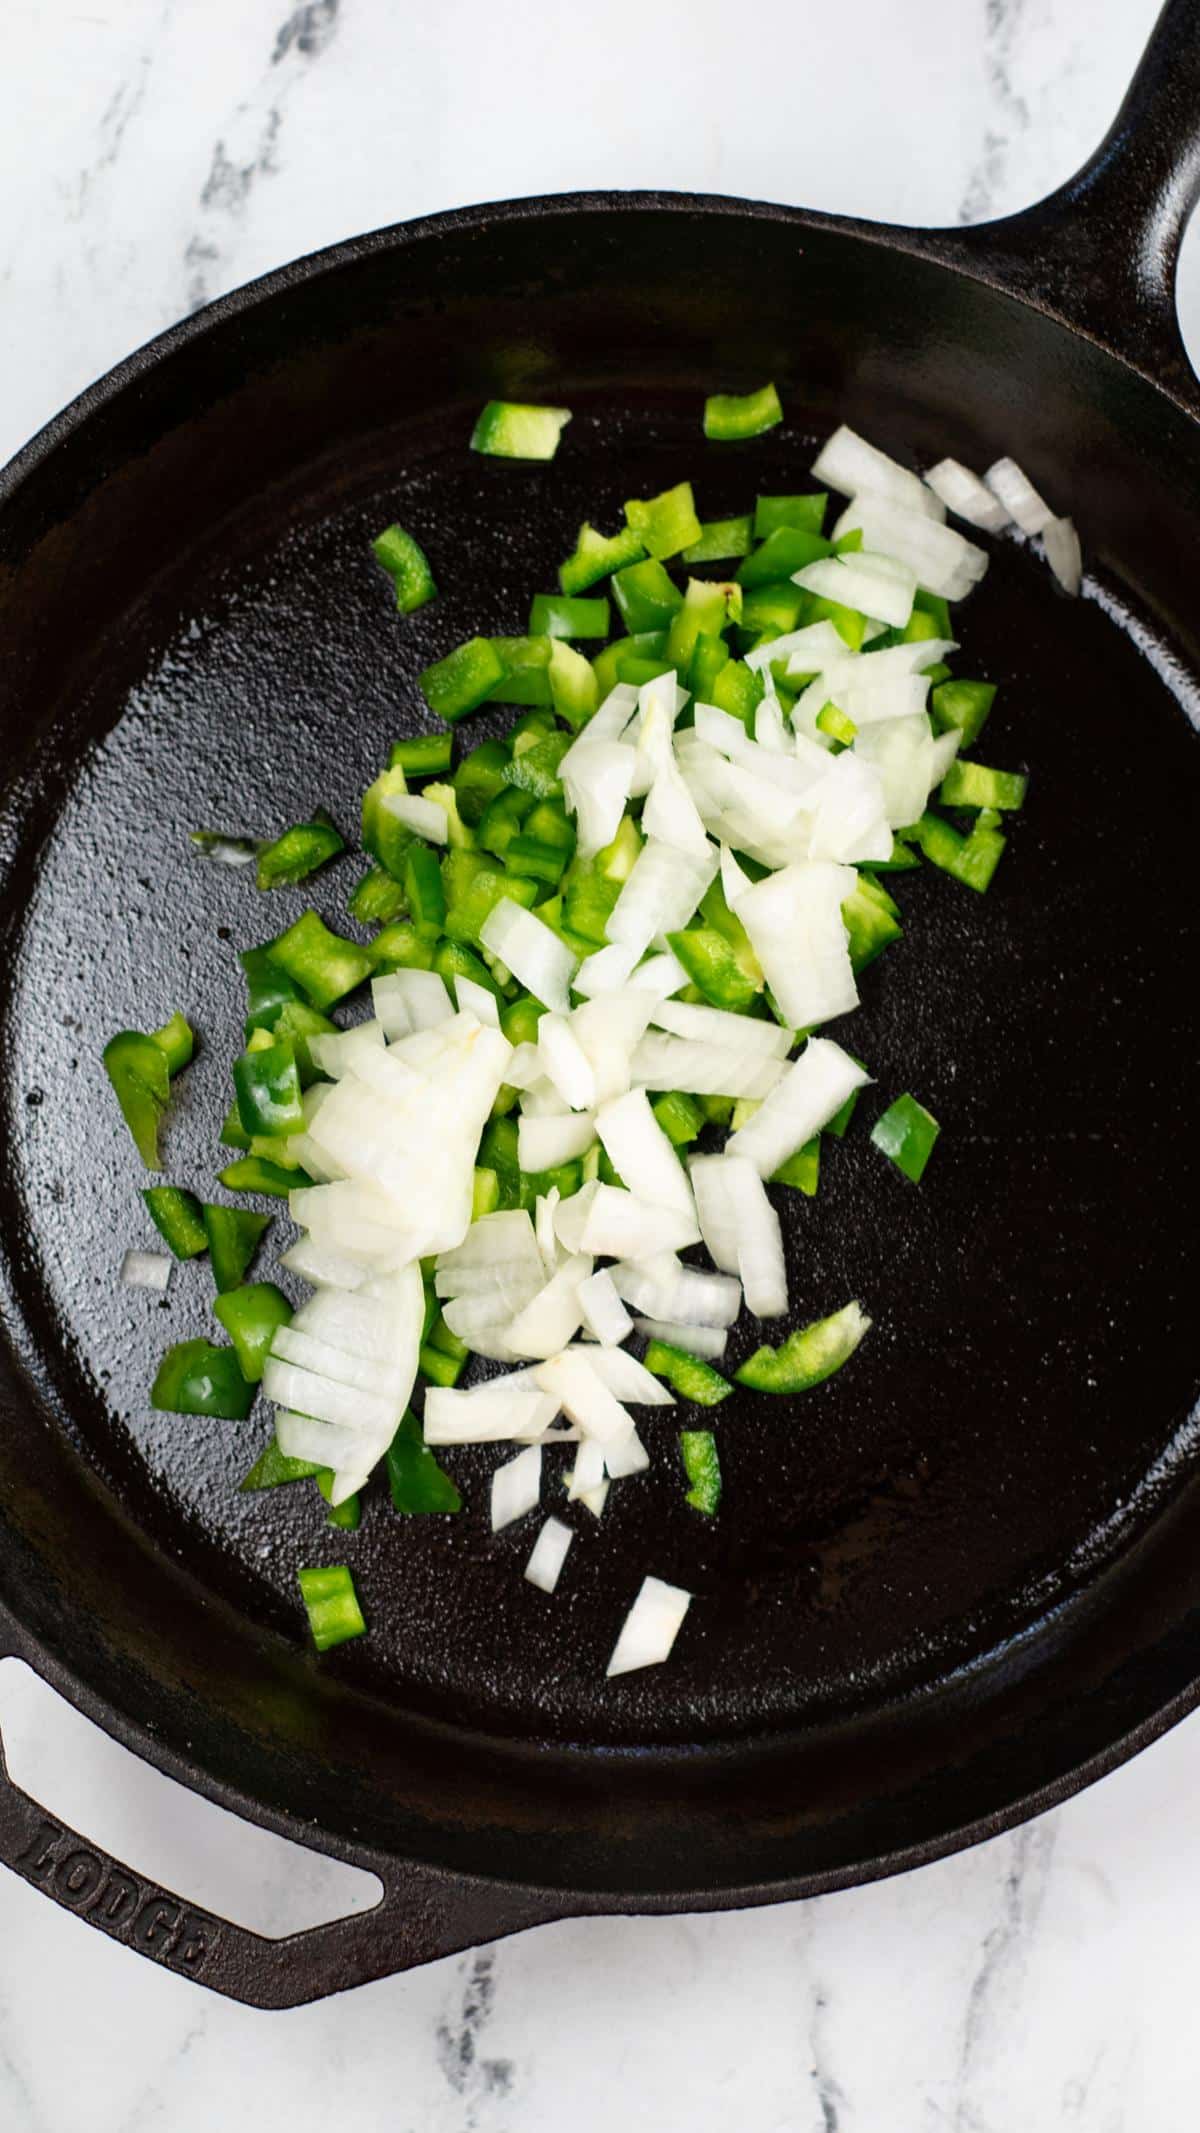 Cast iron pan with green bell pepper and onion.